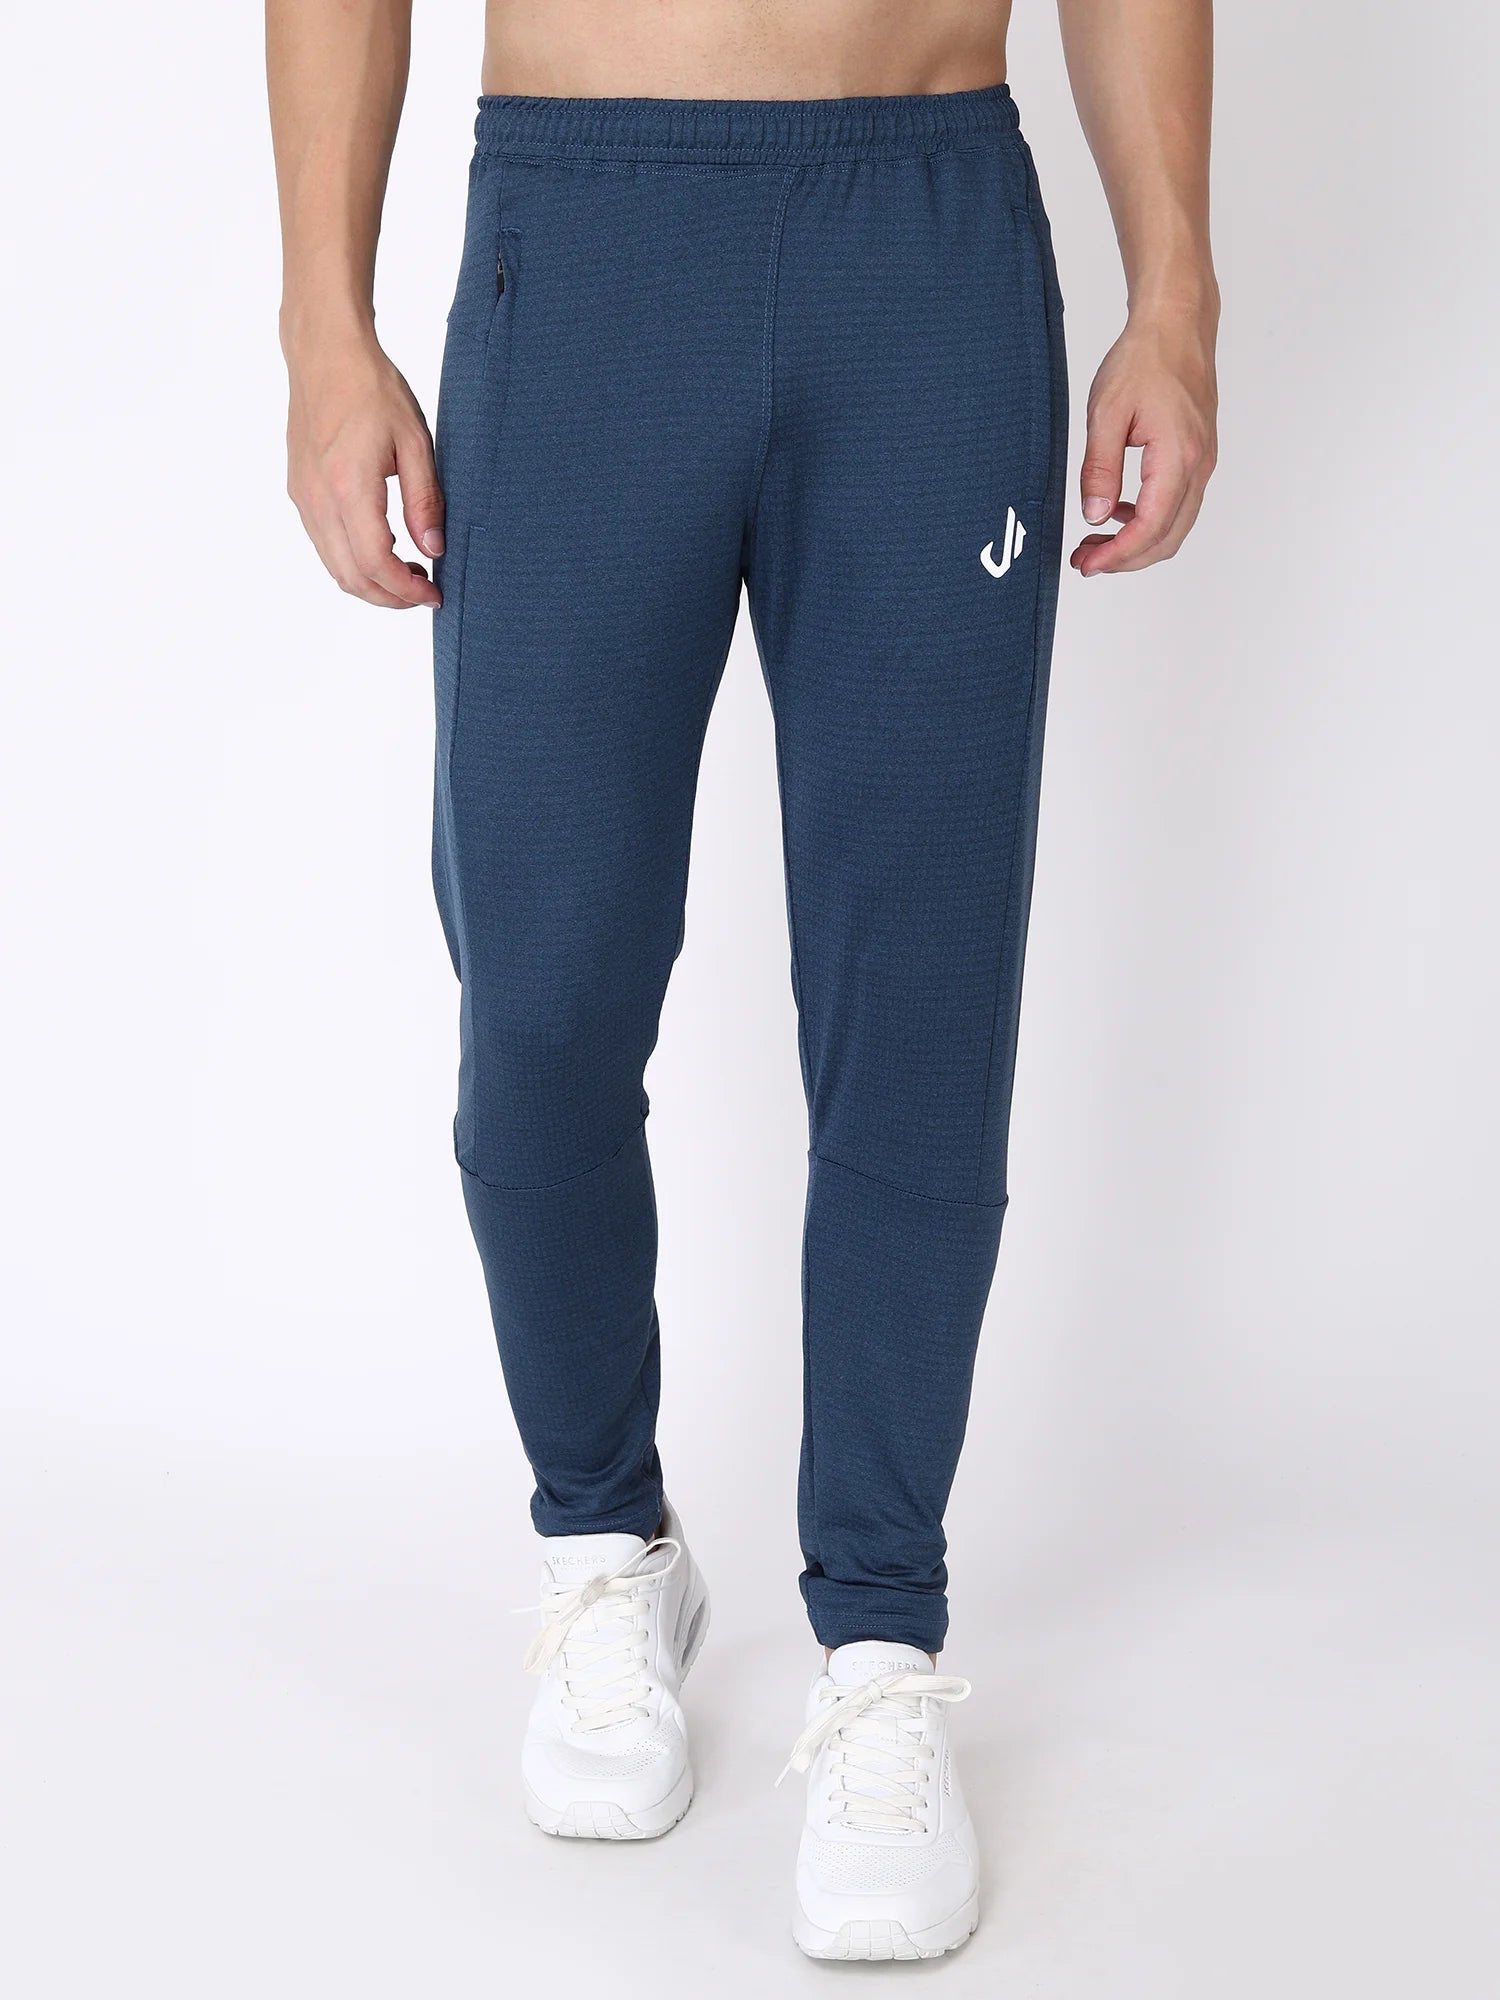 Buy High-Quality Blue Polyester Track Pants For Men at Jeffa – JEFFA